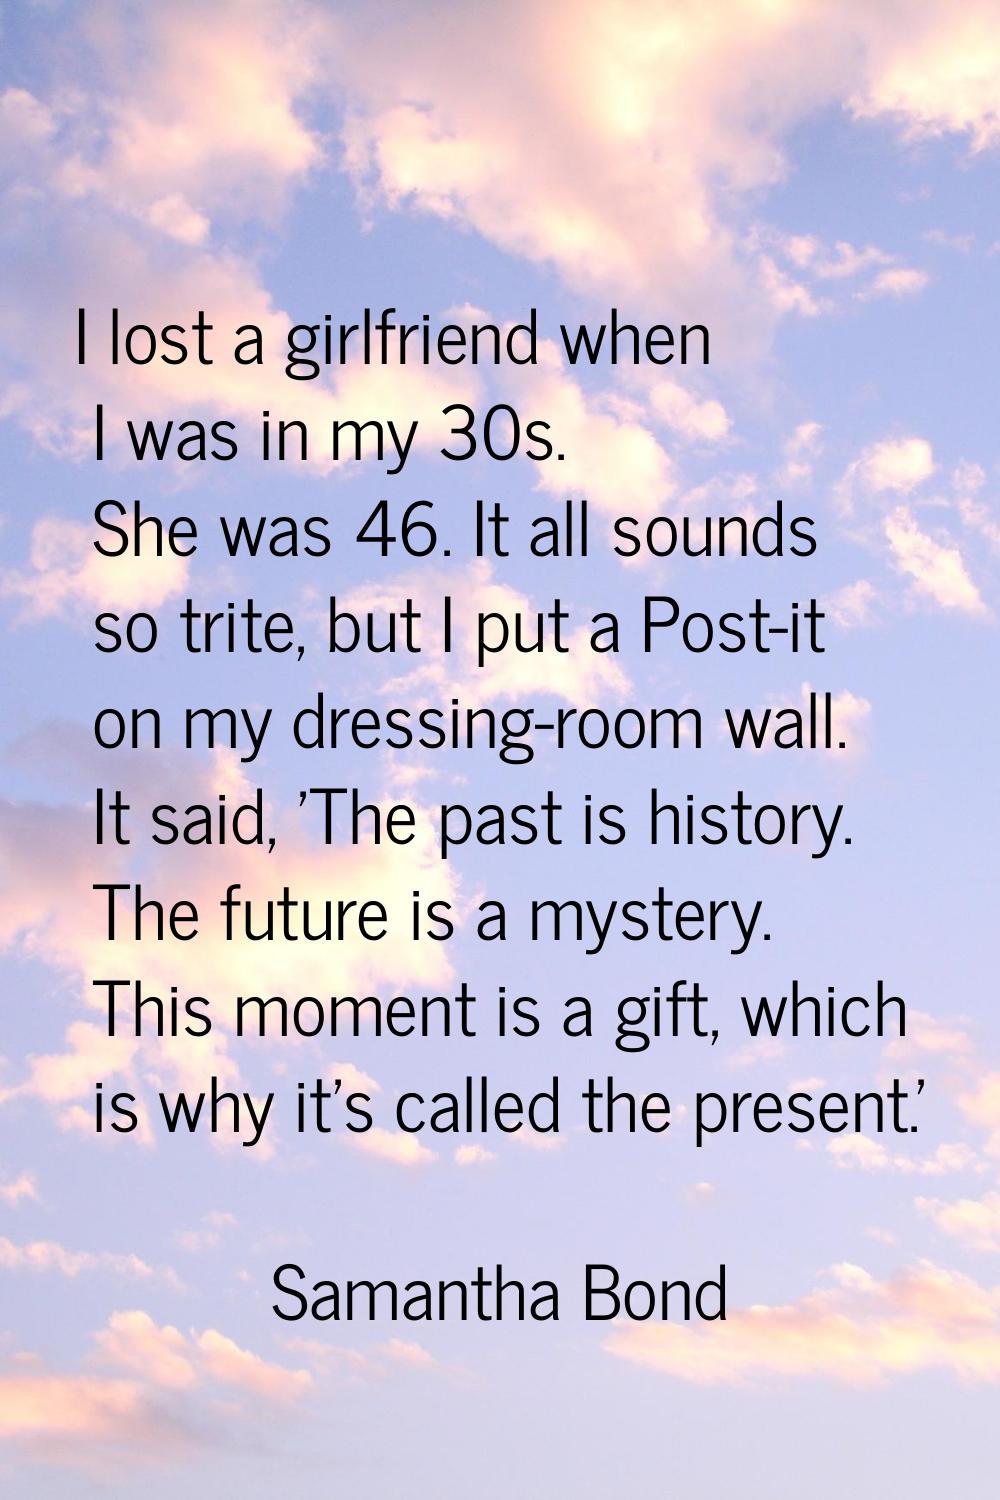 I lost a girlfriend when I was in my 30s. She was 46. It all sounds so trite, but I put a Post-it o